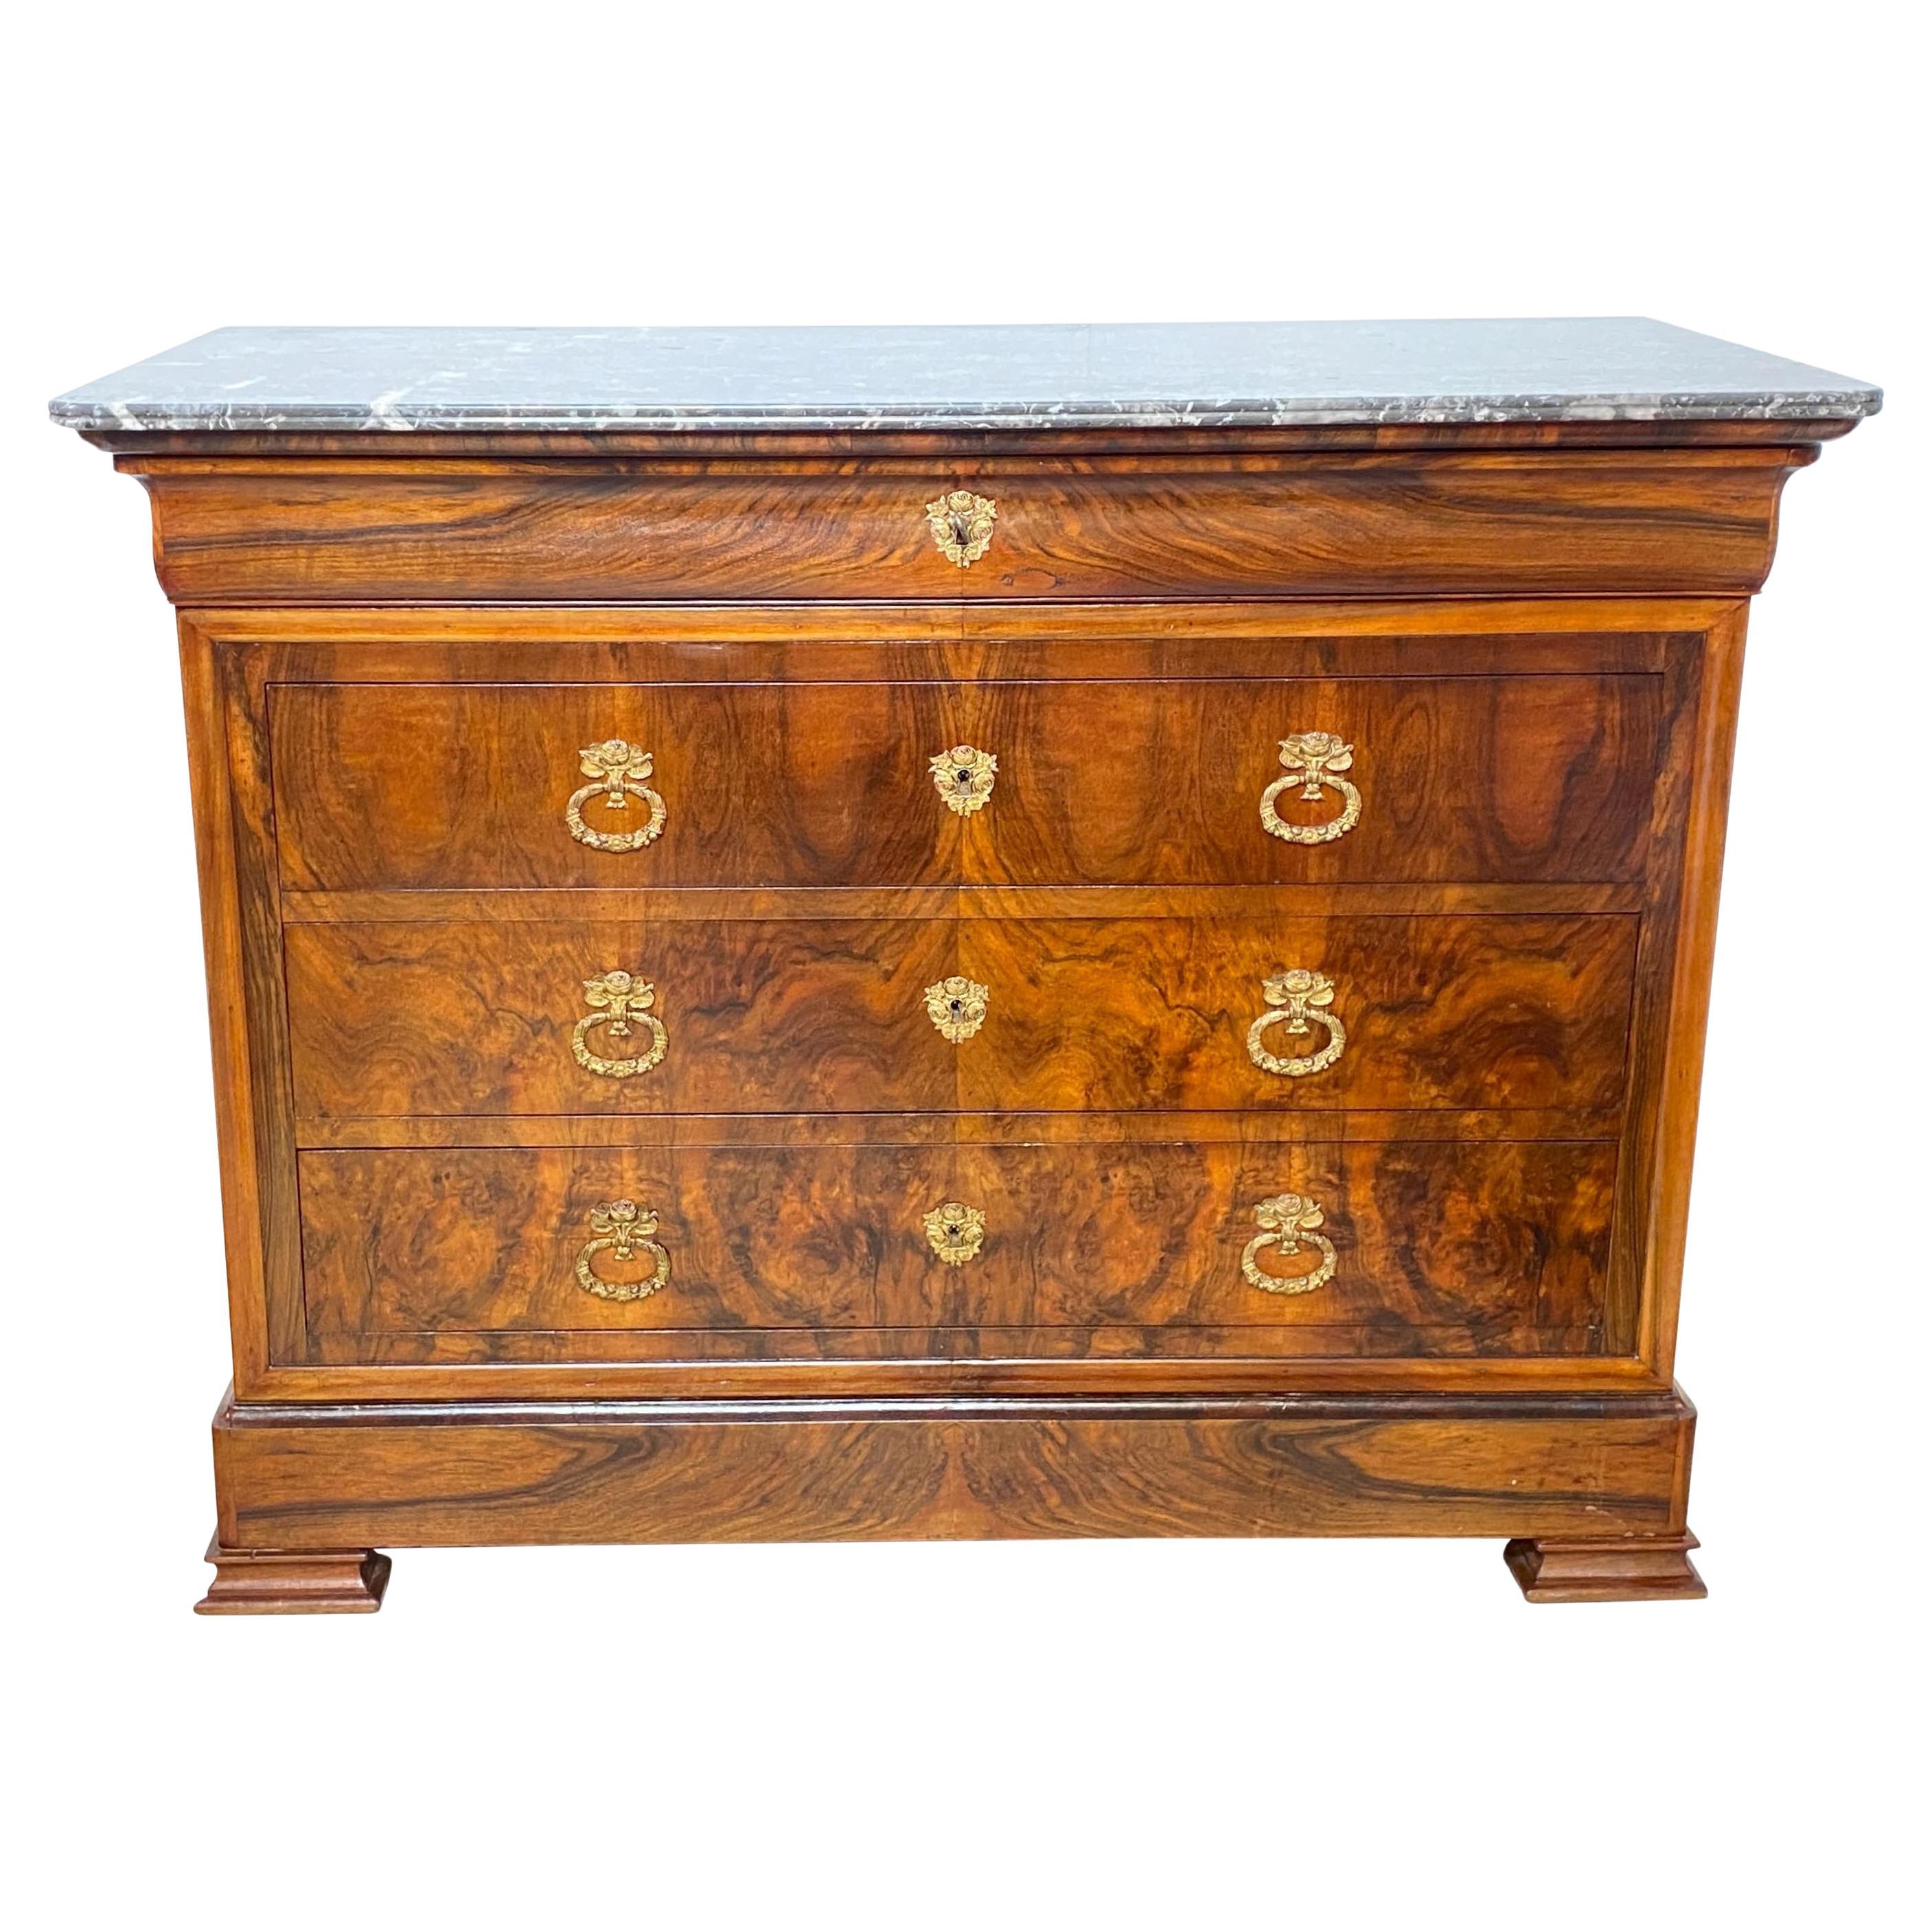 This Louis Philippe period commode or chest of drawers displays the exemplary craftsmanship of the early nineteenth century with figural burl walnut and solid walnut panel sides, and capped with a marble top. Having four drawers with bronze original